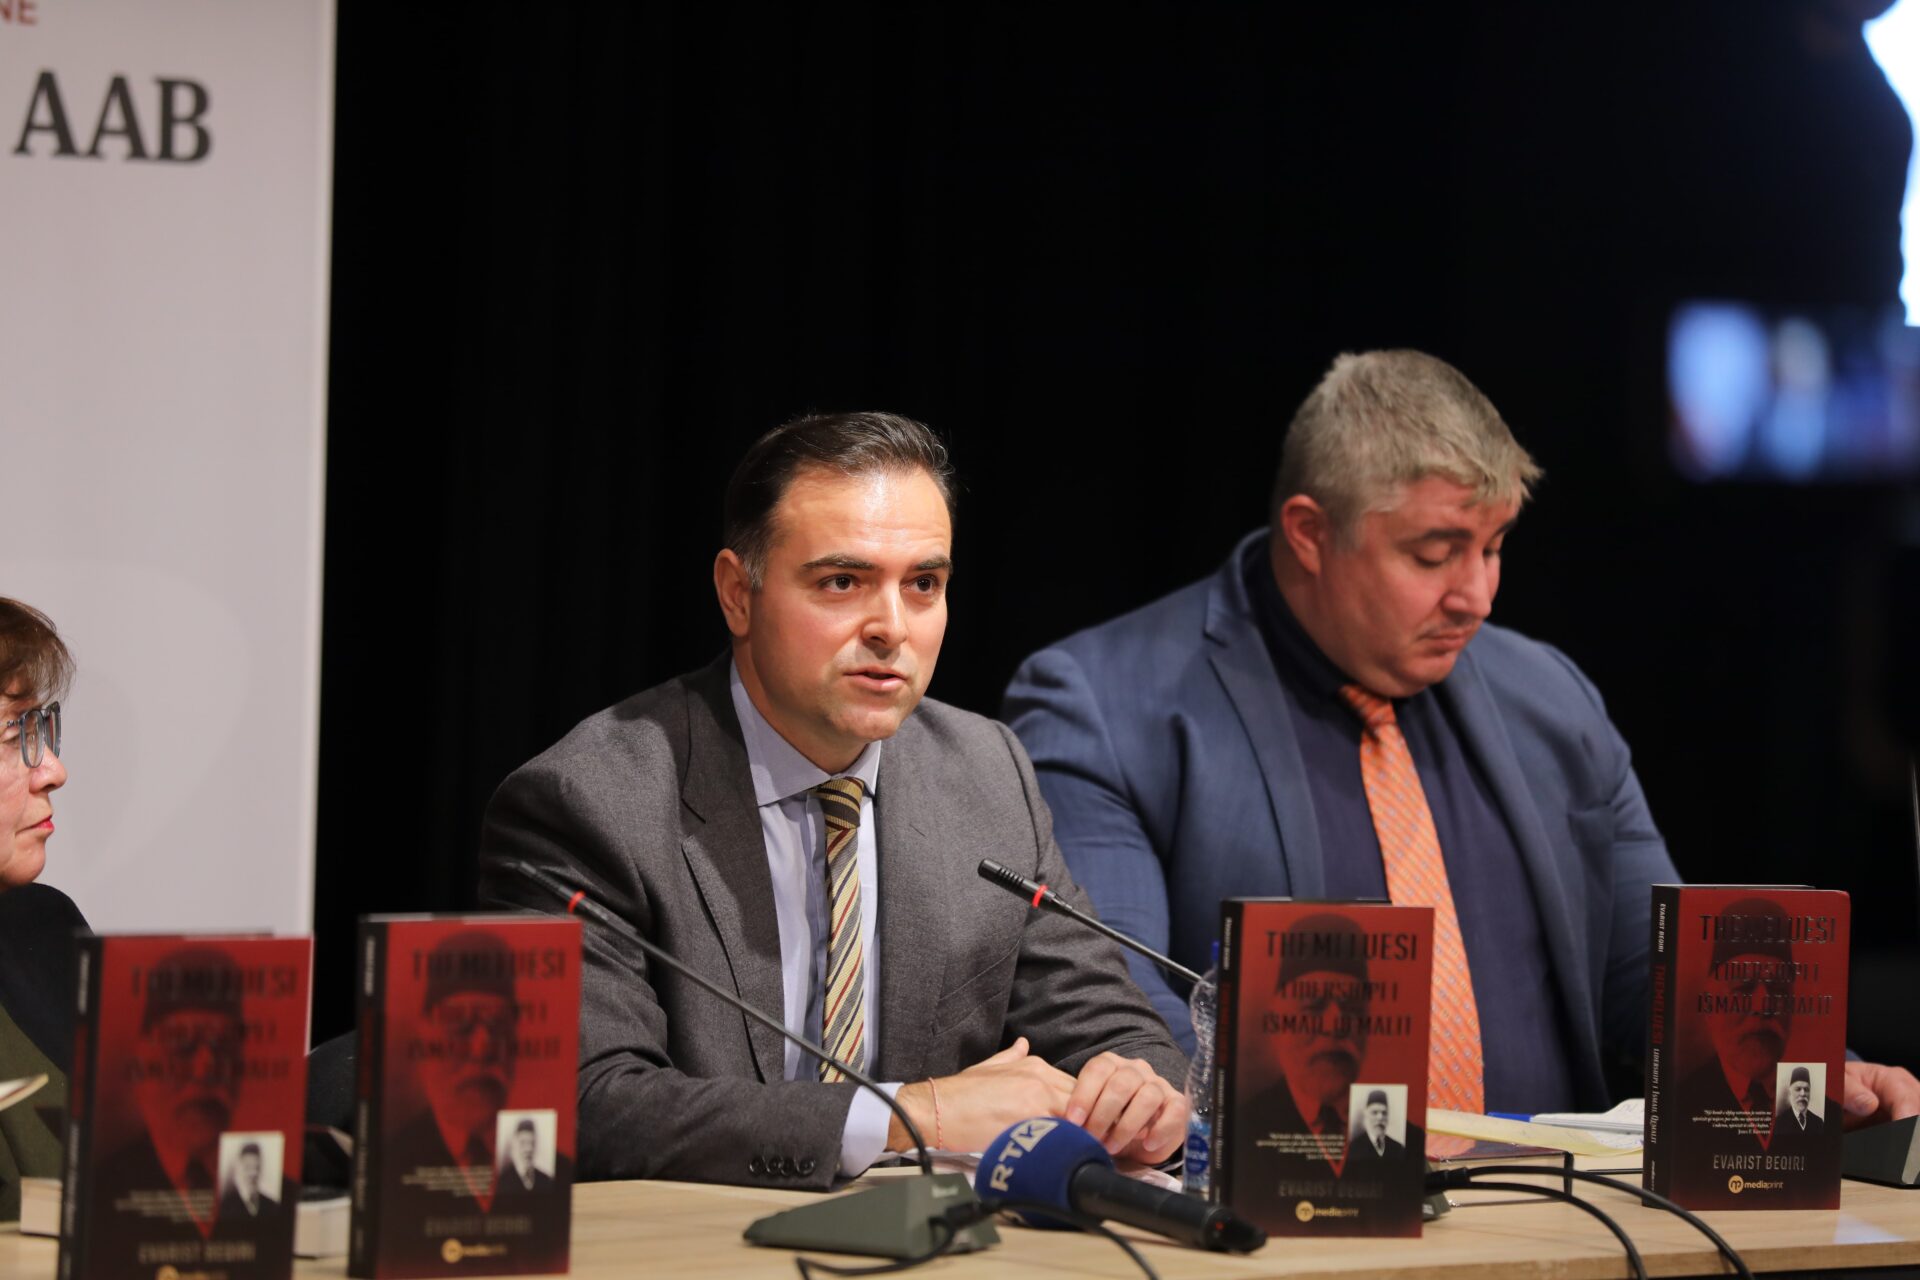 In the AAB College, the book of the author Evarist Beqiri "Founder - Leadership of Ismail Qemali" is promoted